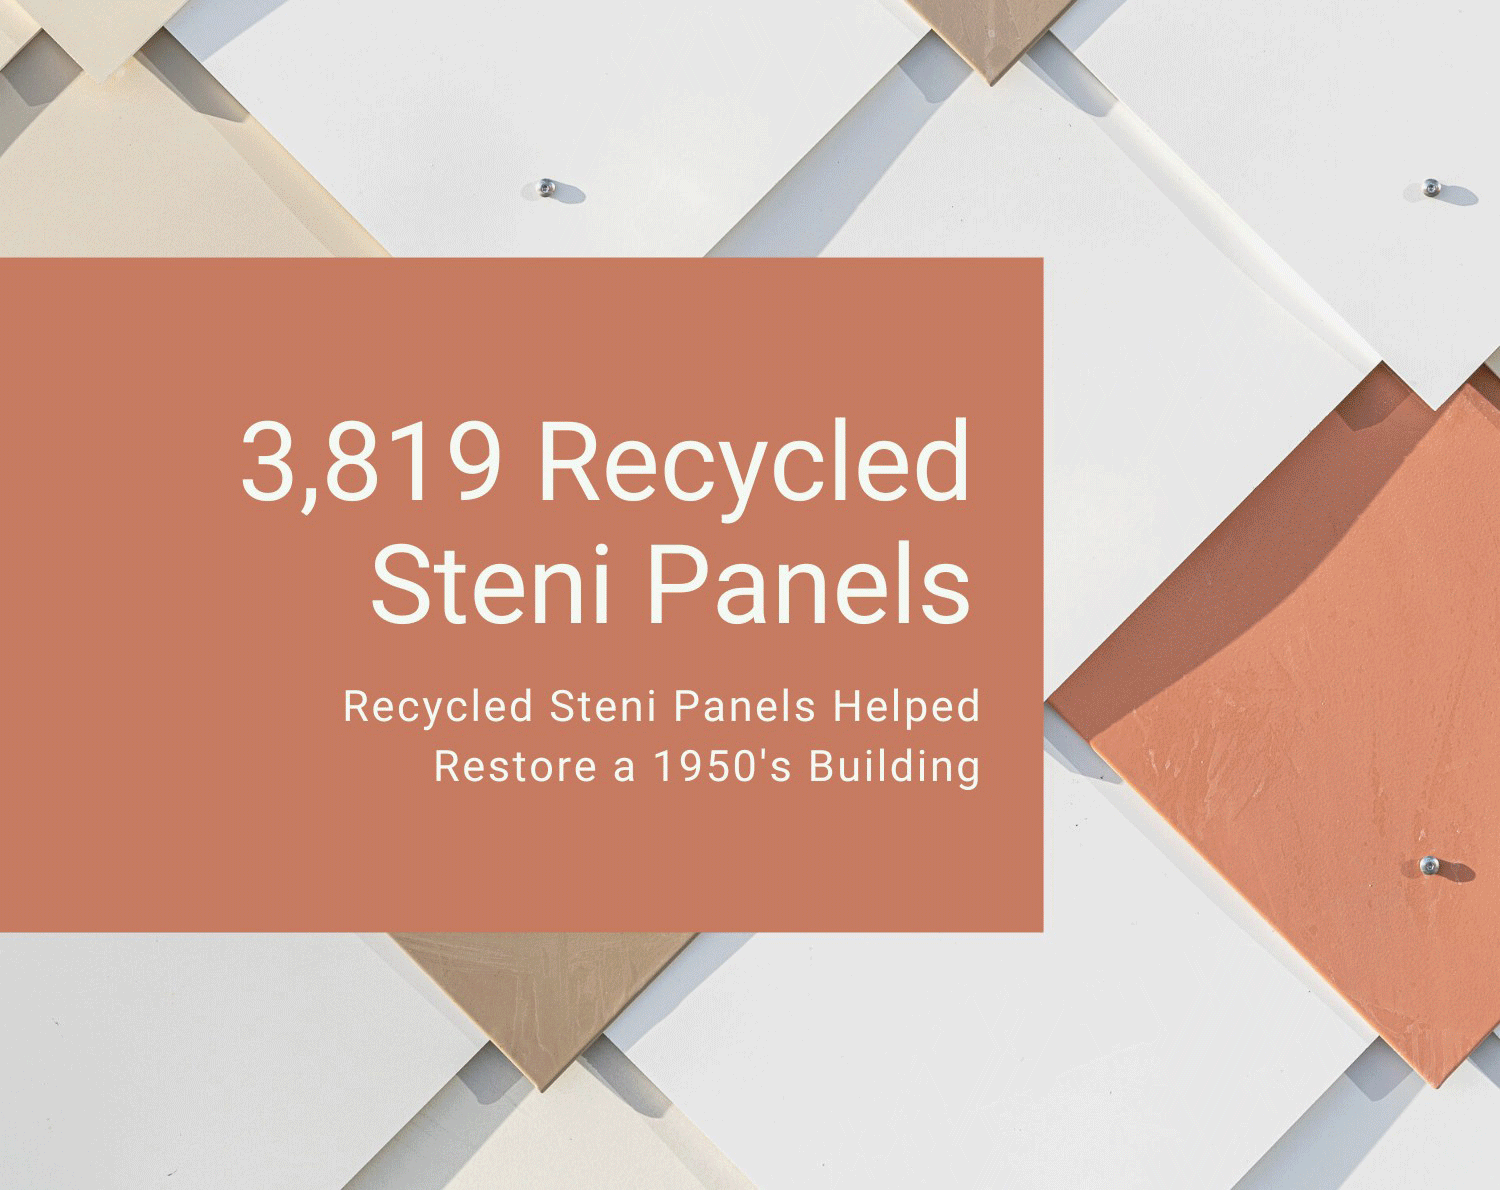 3,819 35-year-old Steni Panels were recycled in a materials reuse building project.